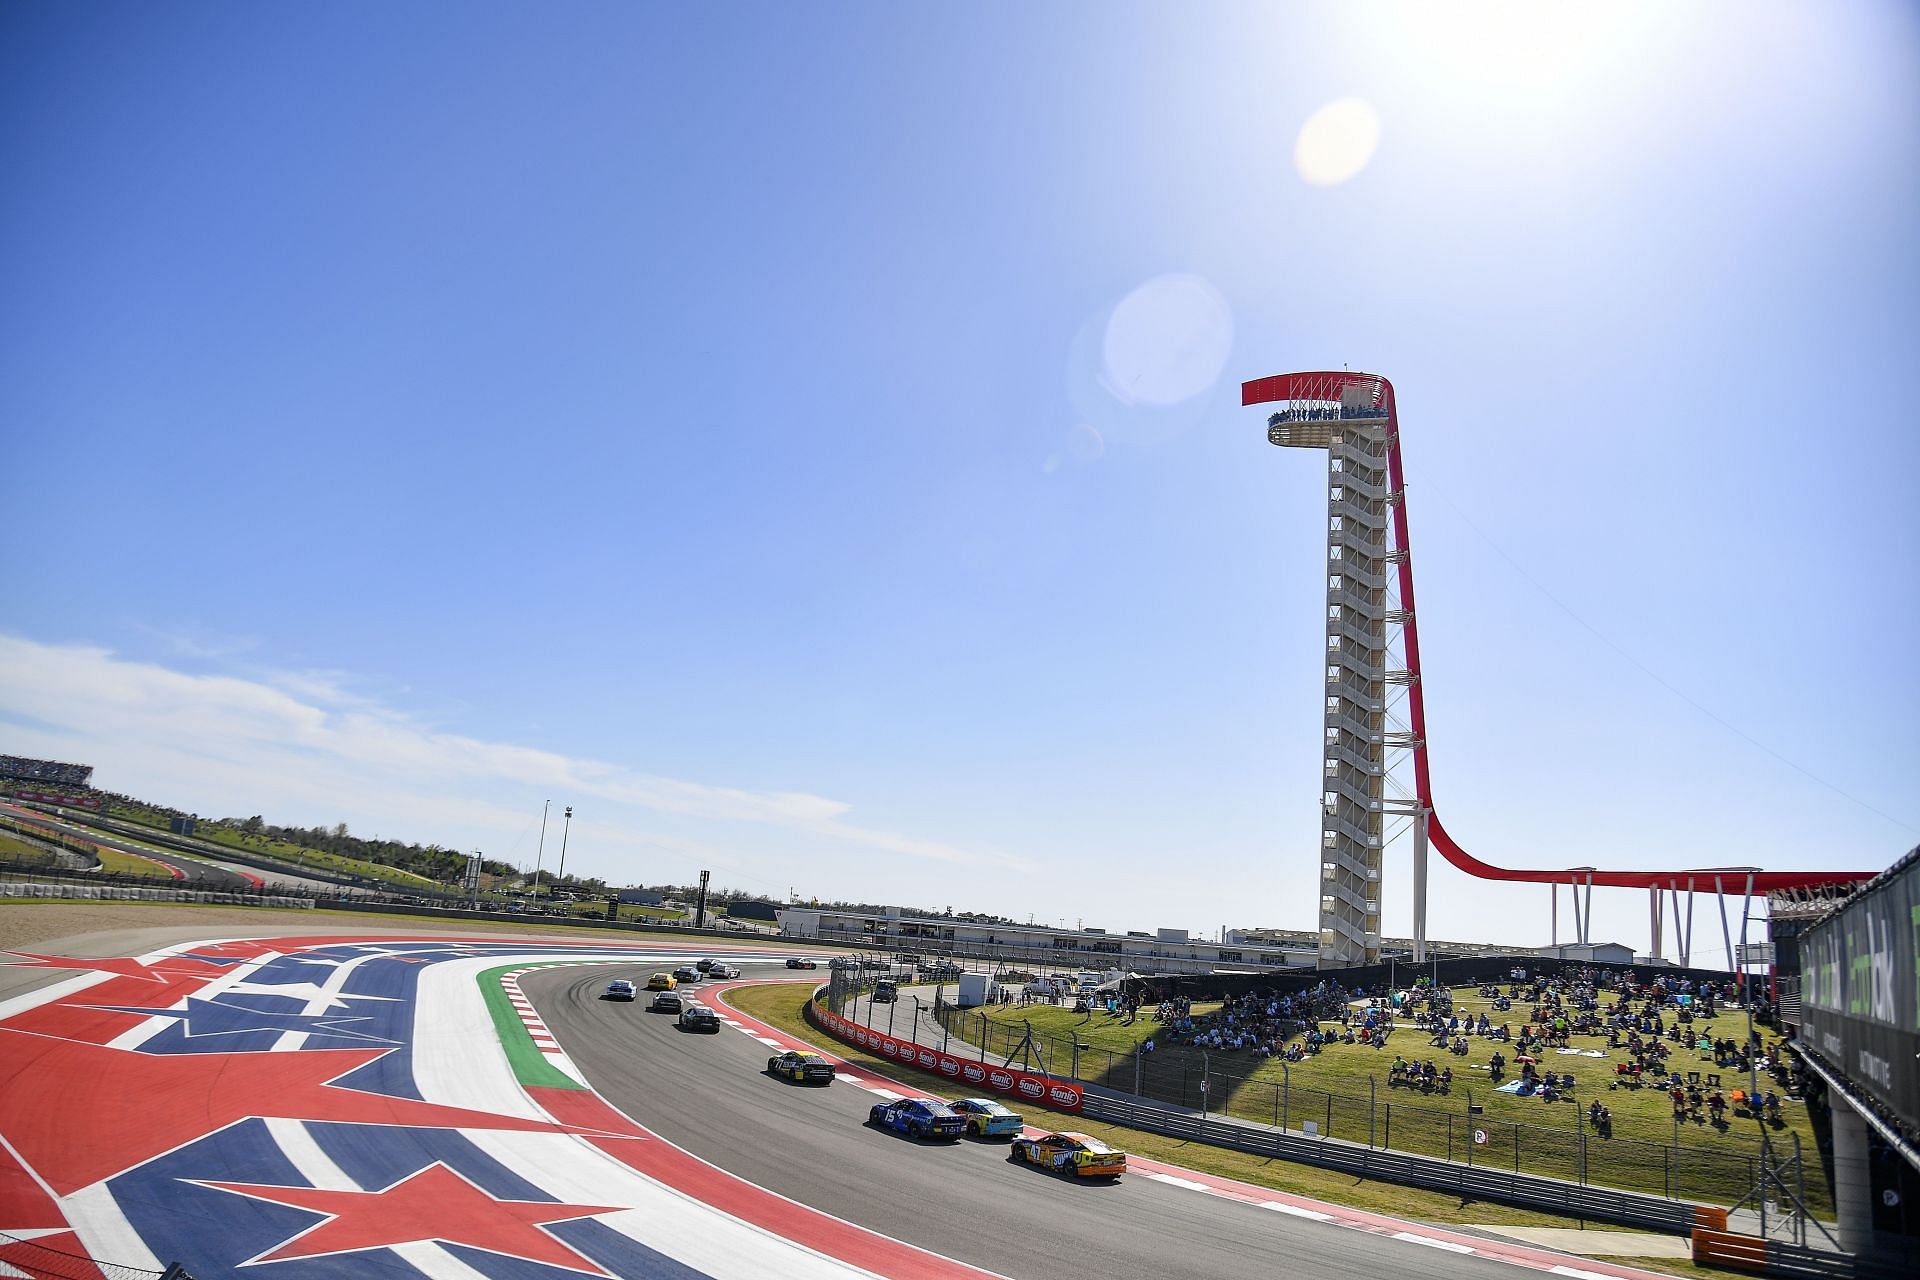 A general view of racing during the NASCAR Cup Series Echopark Automotive Grand Prix at Circuit of The Americas. (Photo by Logan Riely/Getty Images)